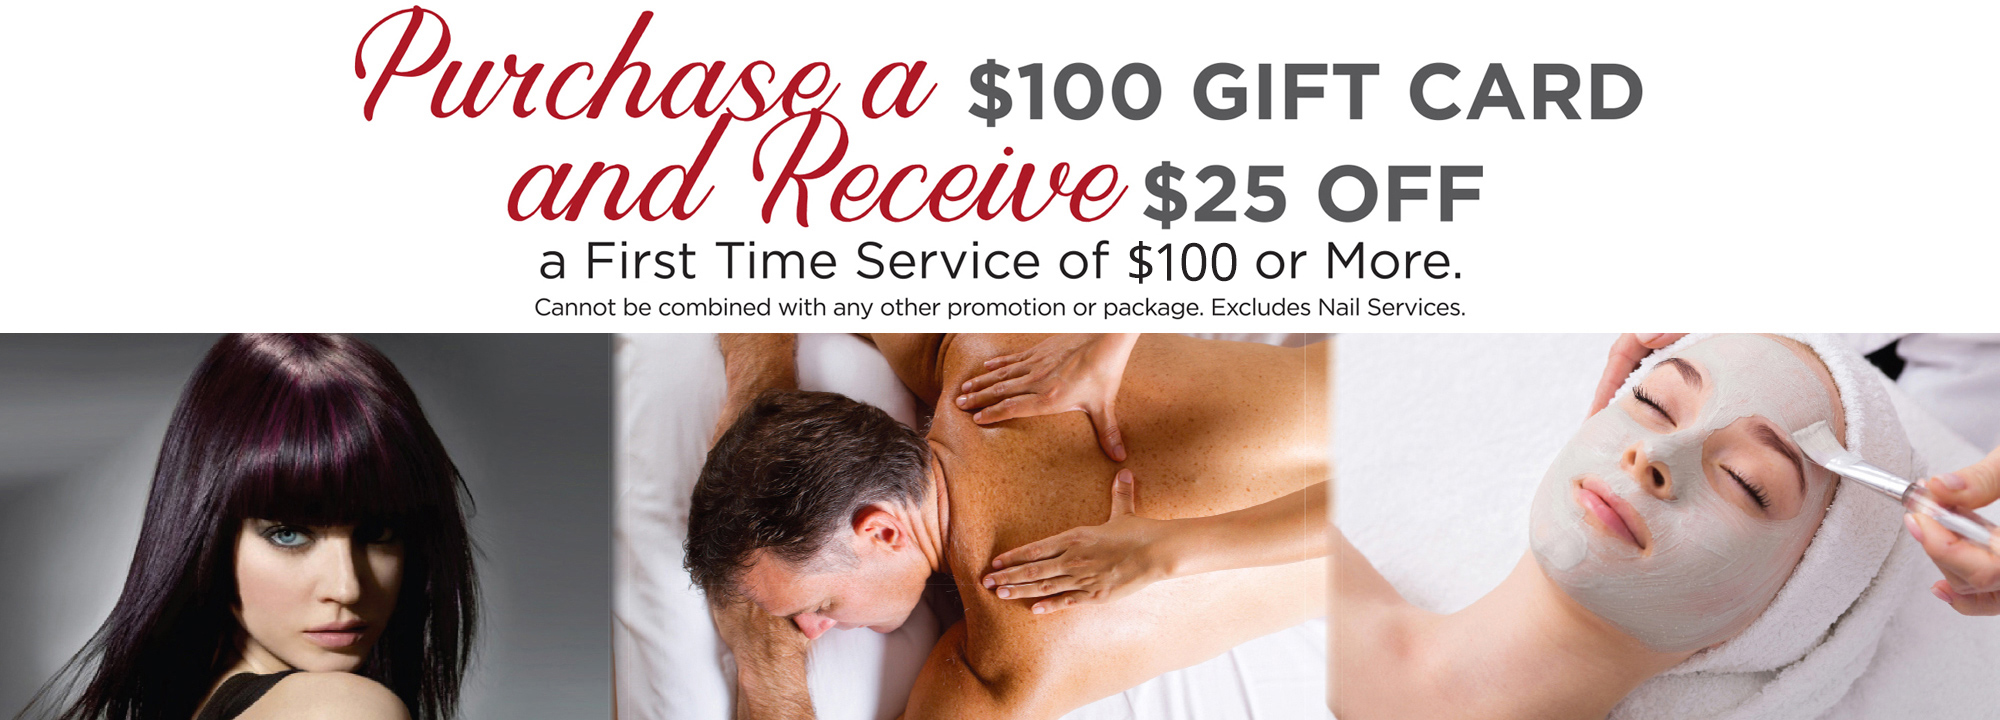 Promotional image: Purchase a $100 gift card and receive $25 off a first time service of $100 or more.